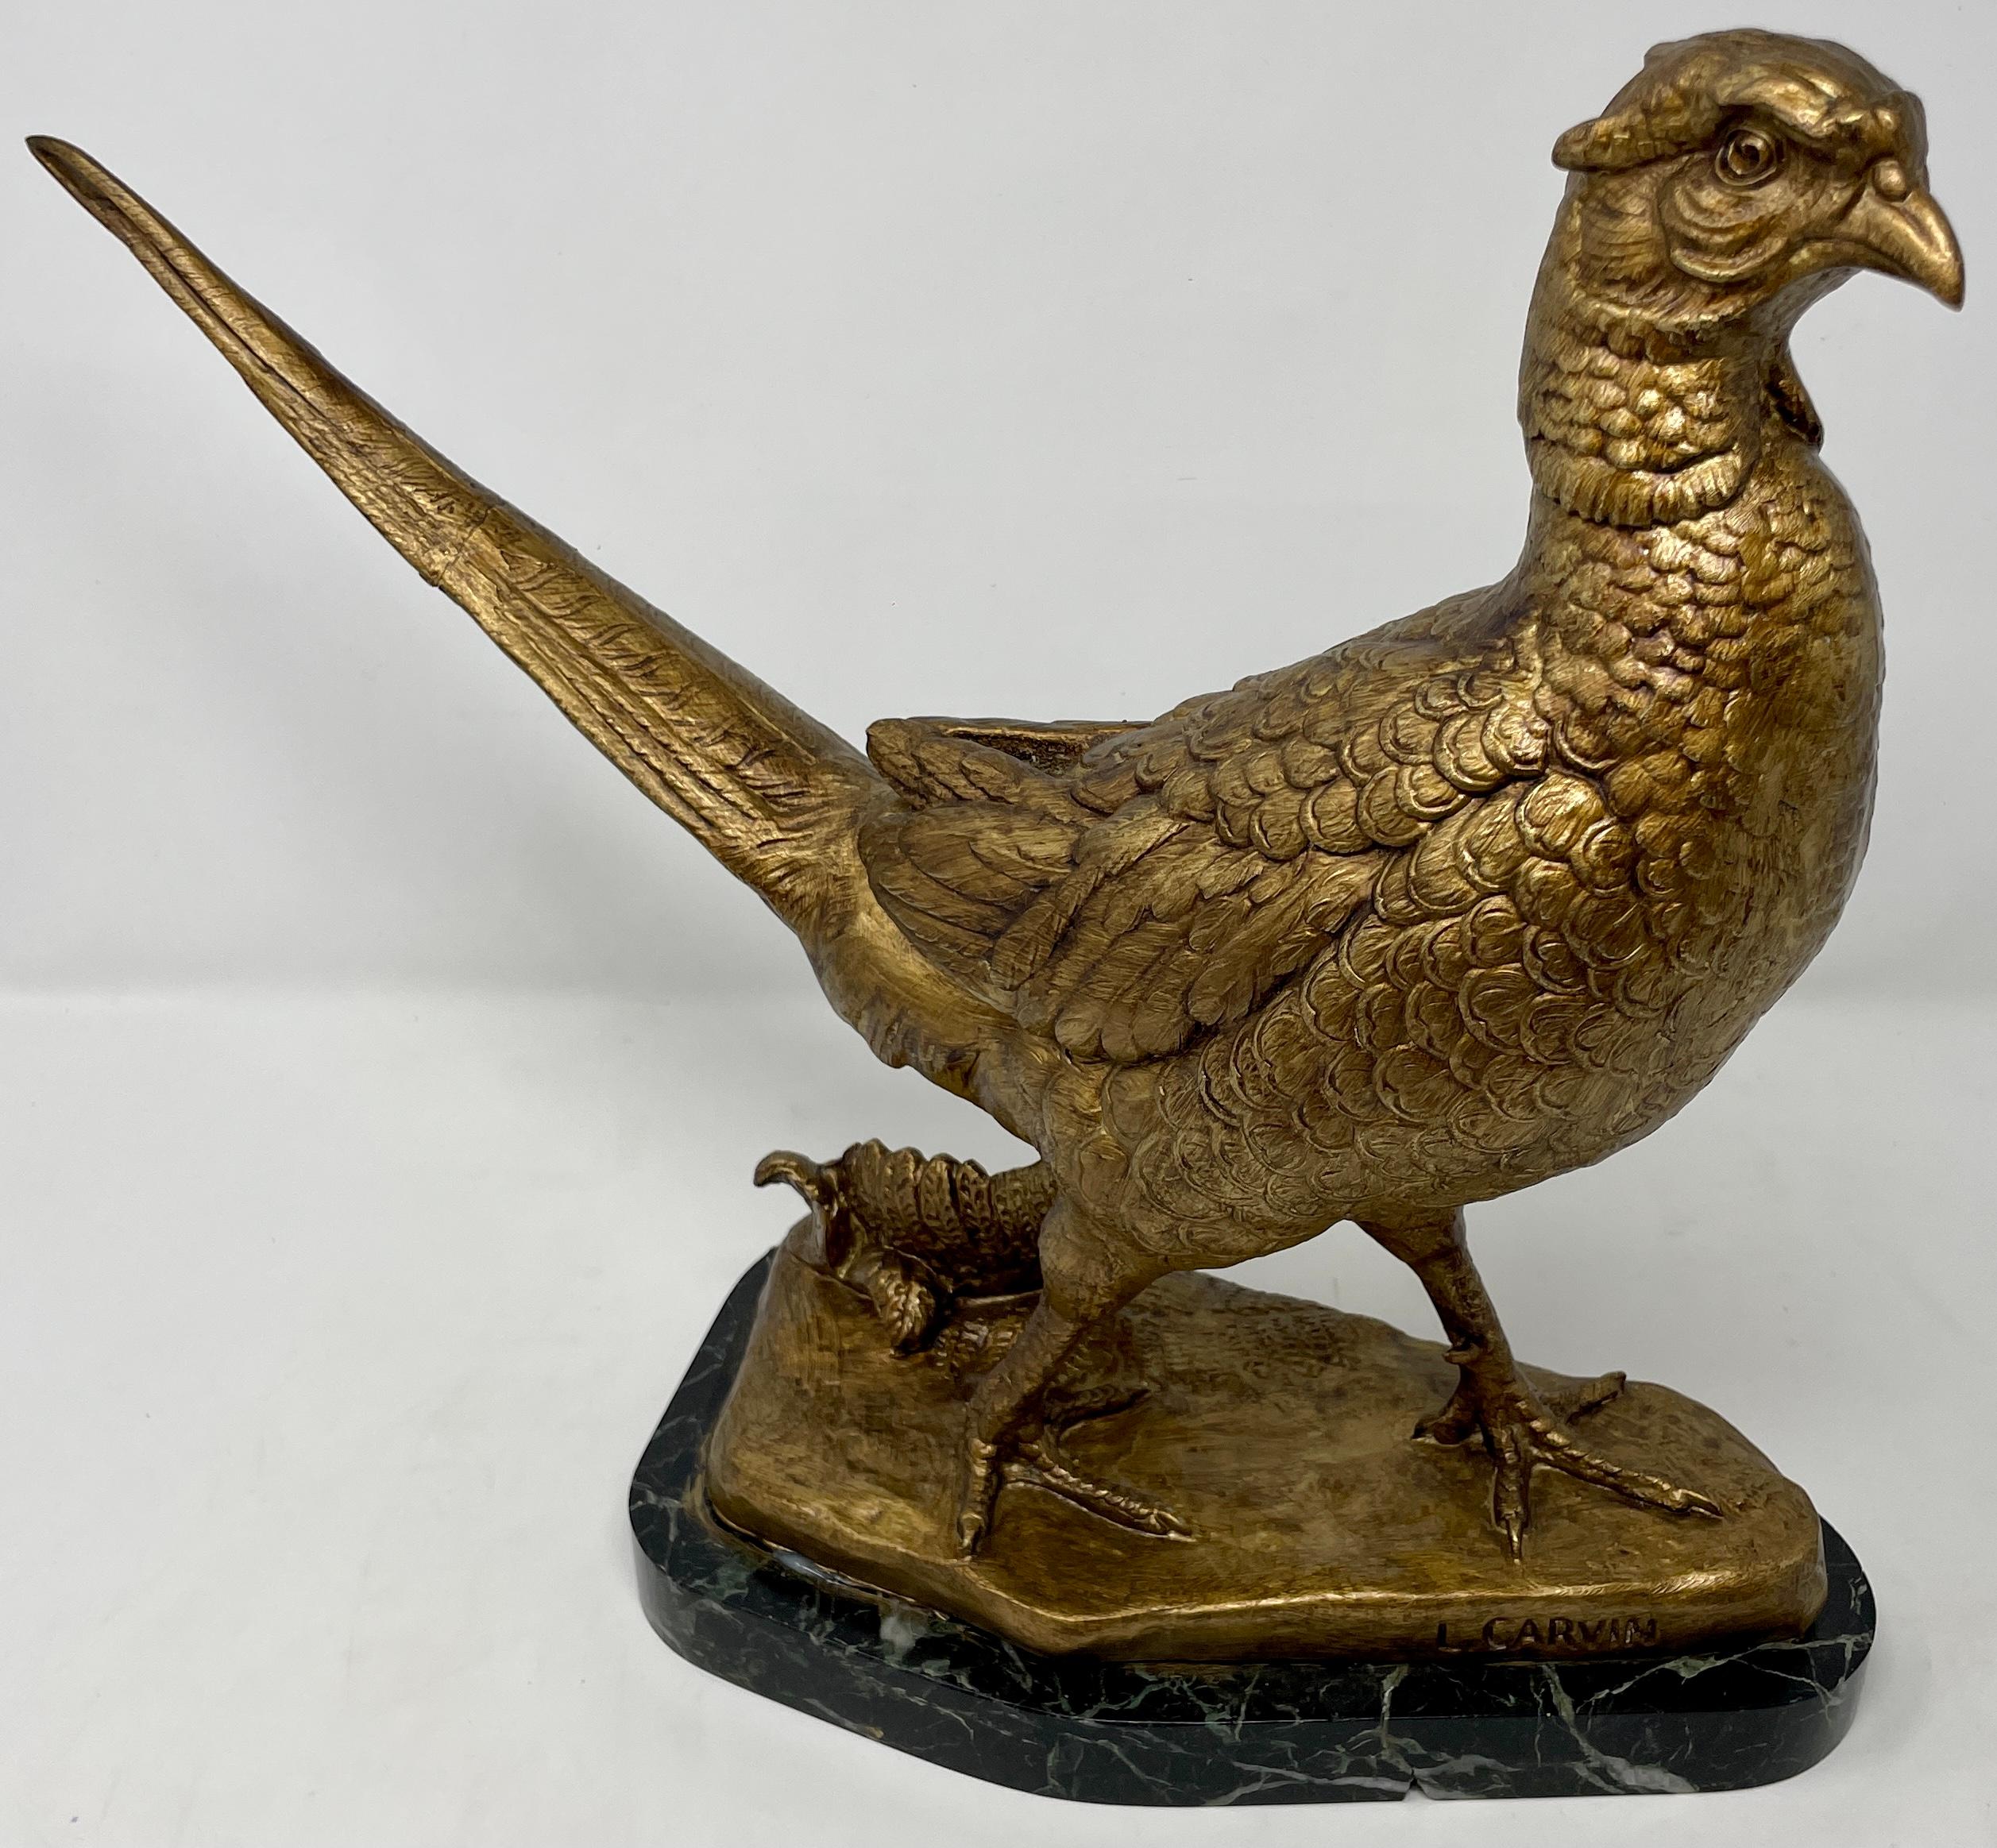 Antique French 19th century gold bronze pheasant animalier sculpture on green marble base signed 